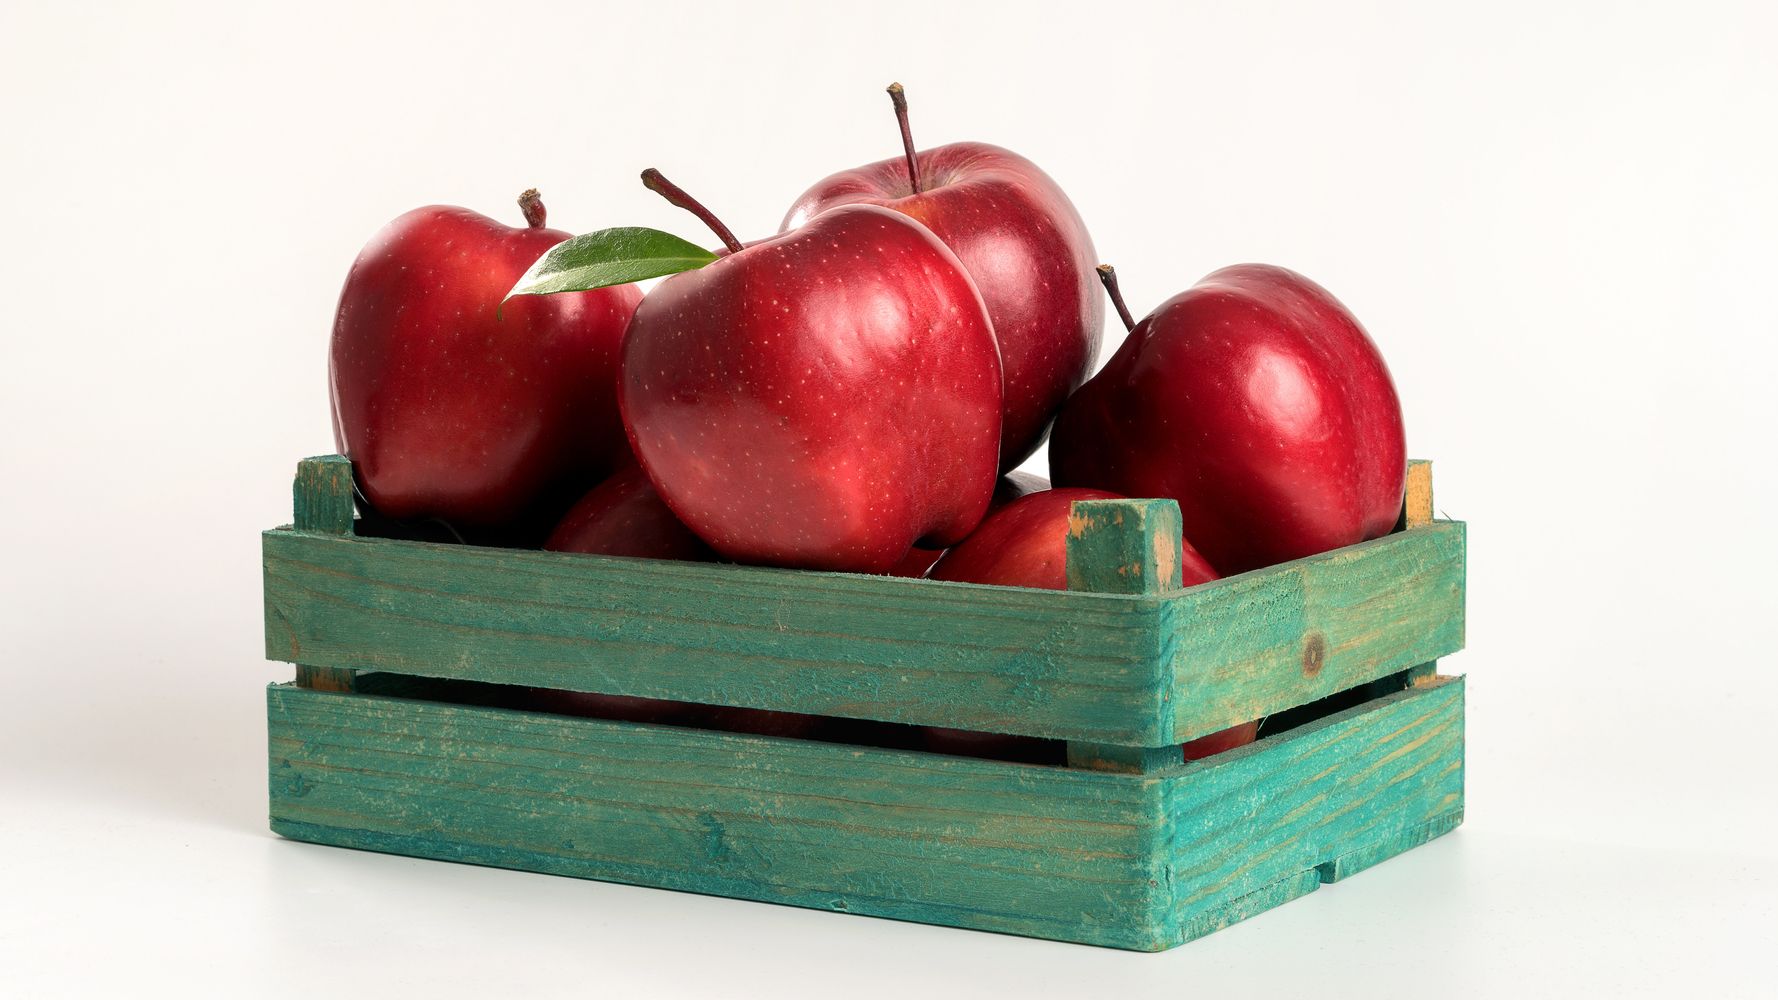 The Red Delicious Isn't Very Delicious. Why Is It So Popular?